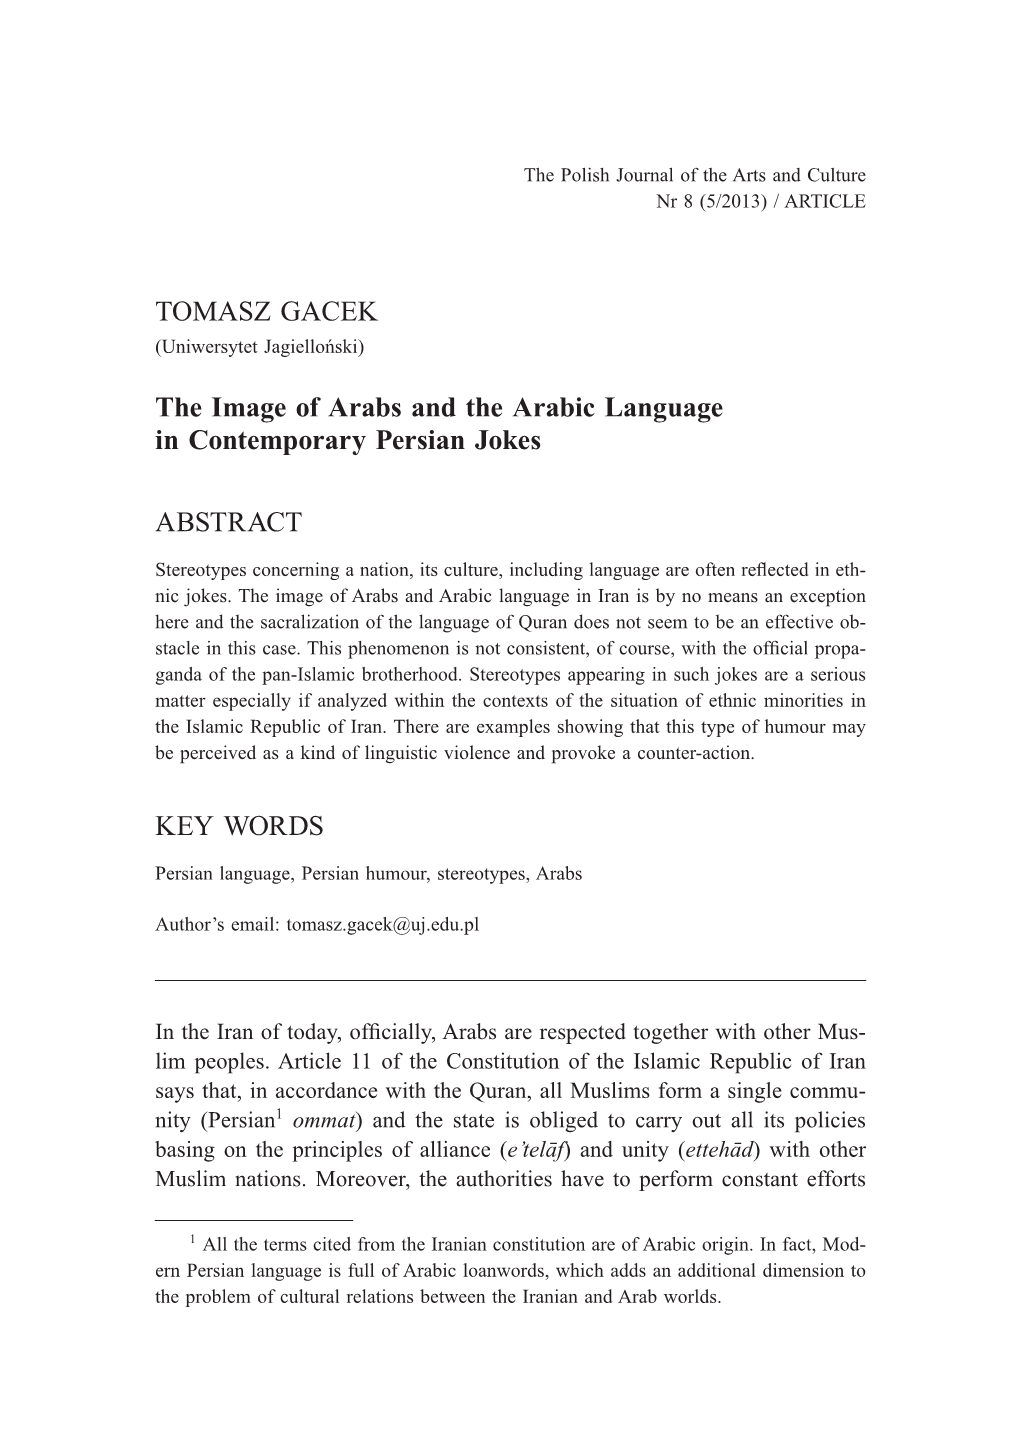 TOMASZ GACEK the Image of Arabs and the Arabic Language In